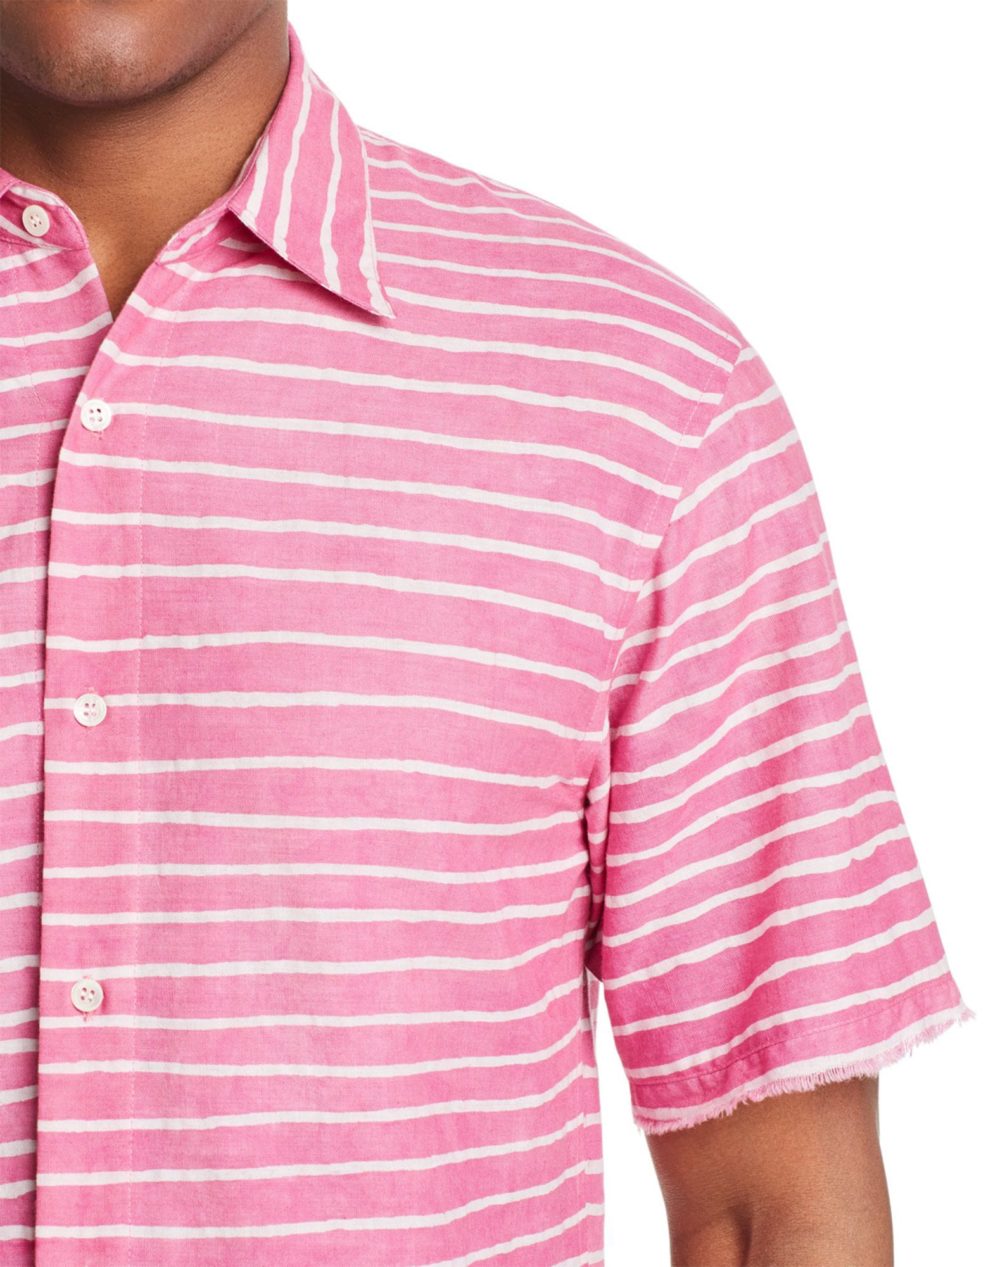 woocommerce-673321-2209615.cloudwaysapps.com-post-imperial-mens-pink-short-sleeve-striped-regular-fit-shirt